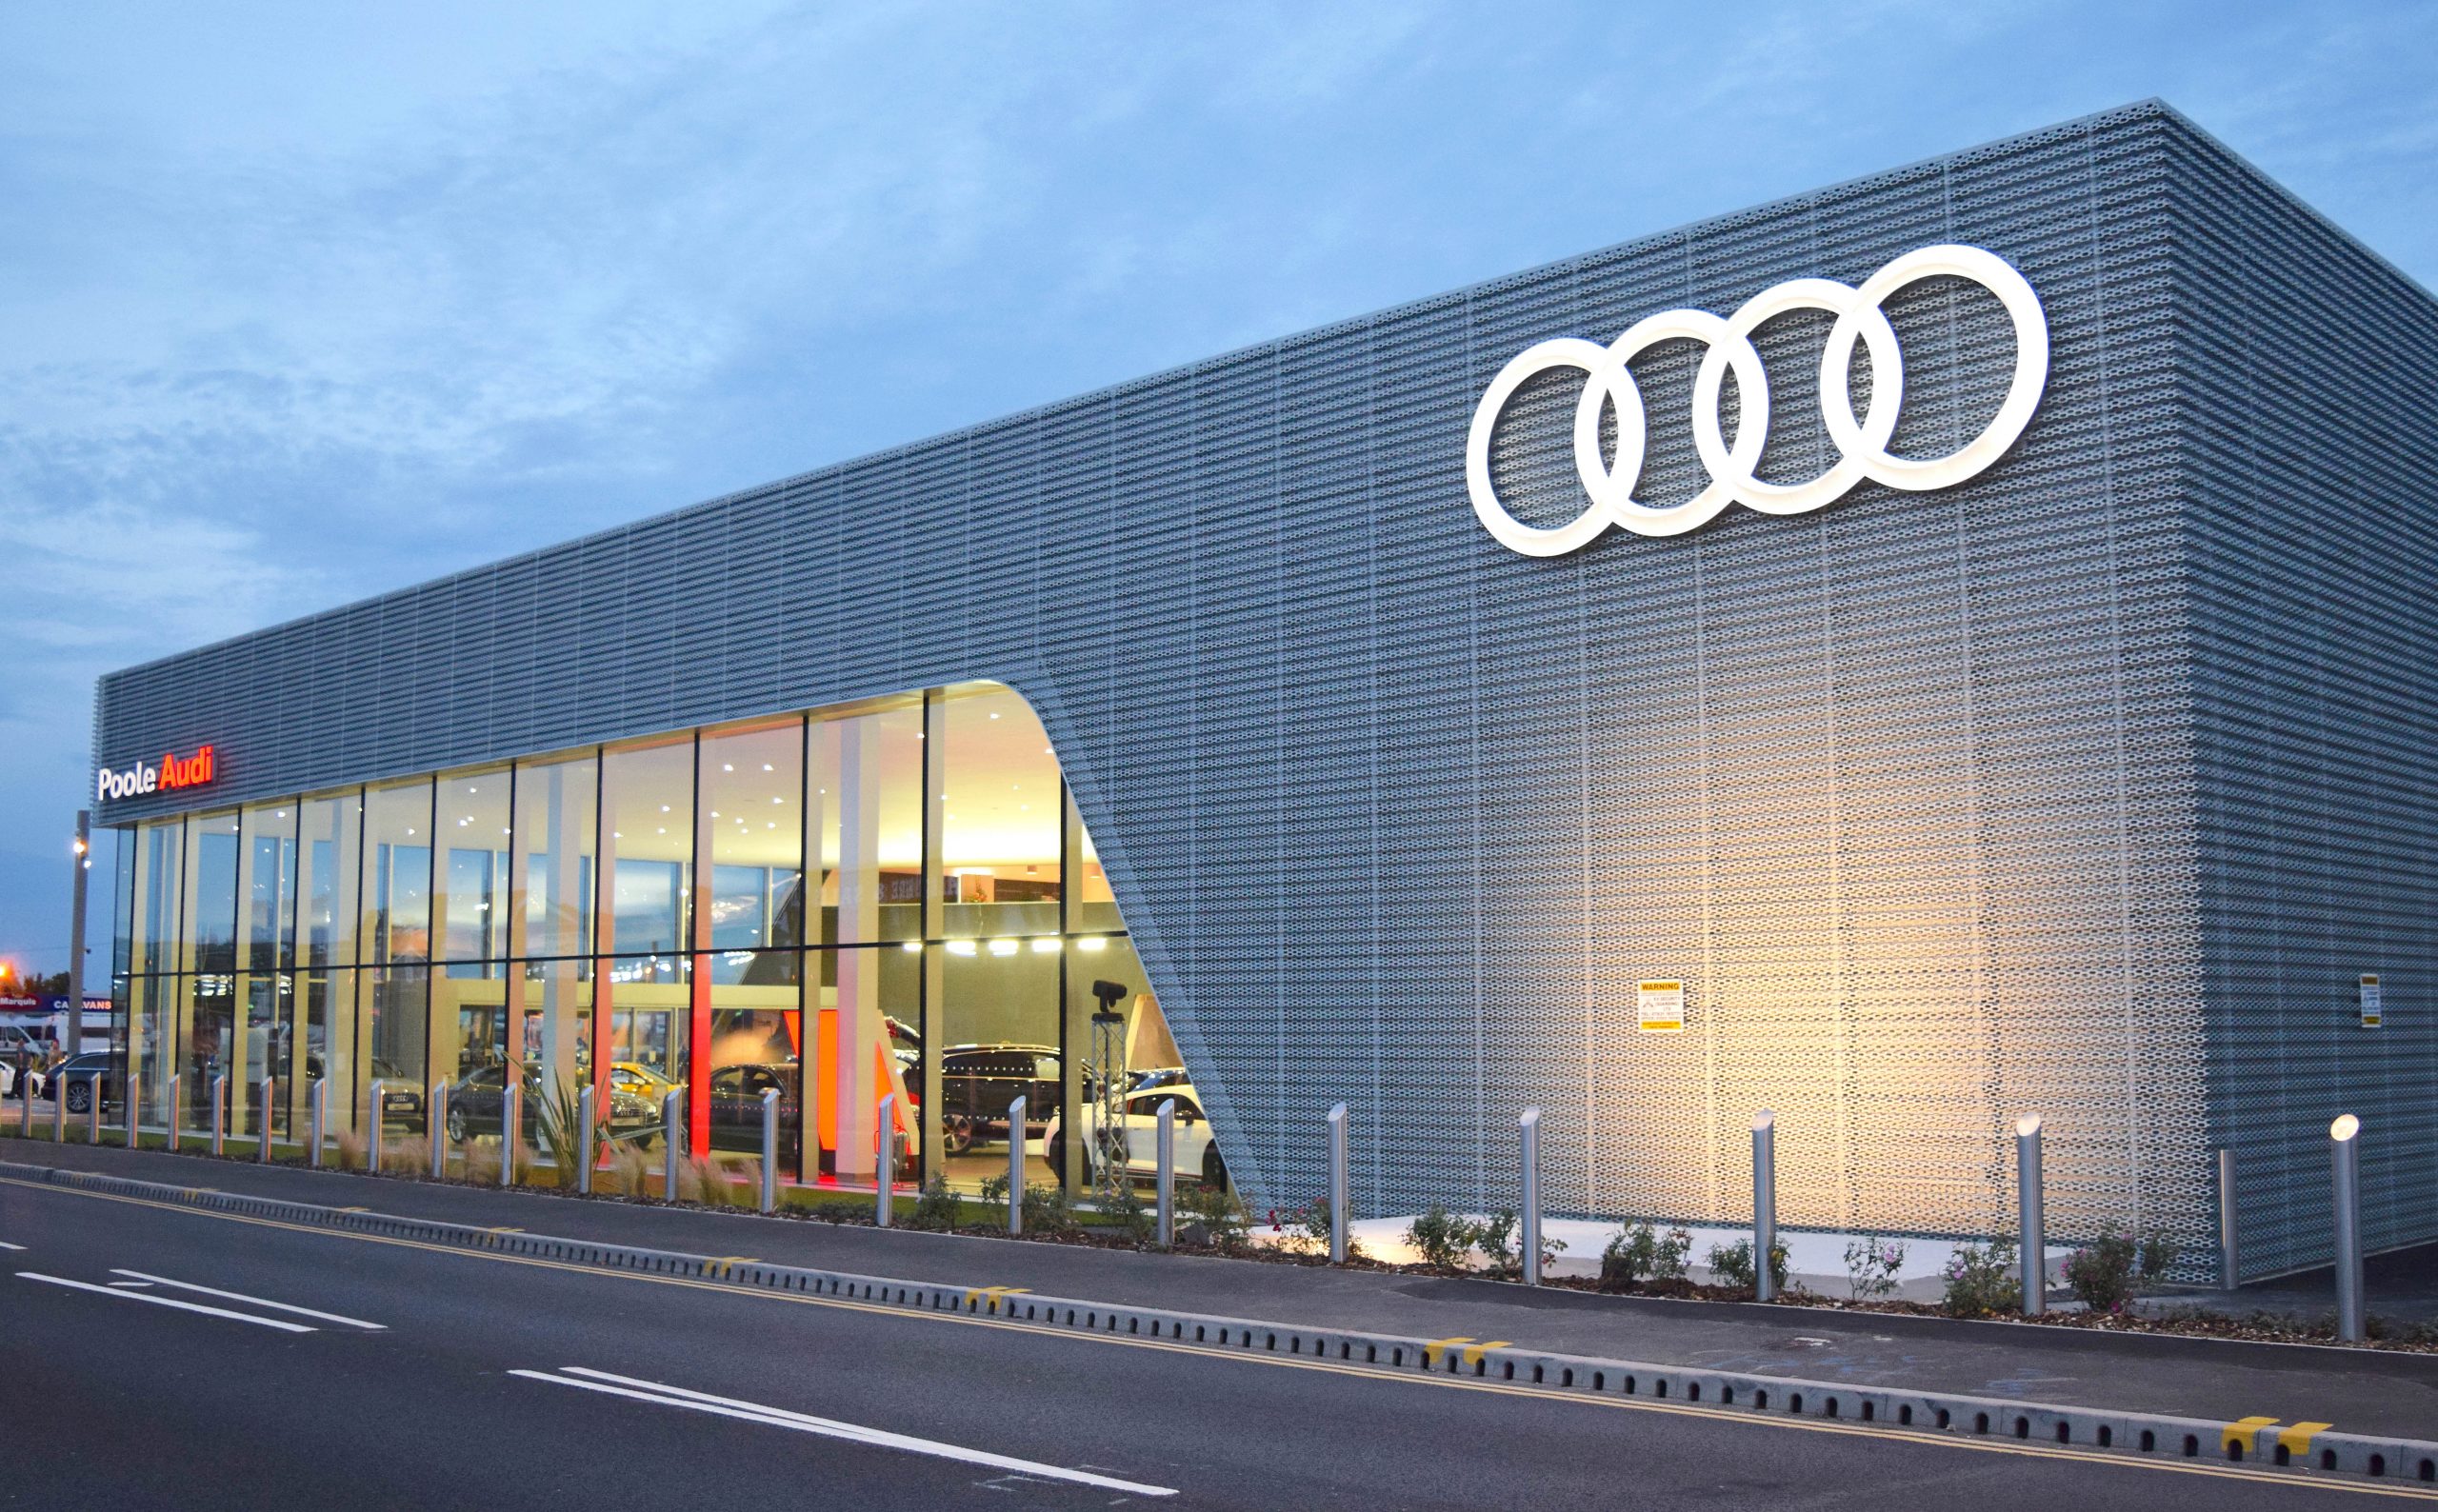 A gym, spa and first-class lounge: Poole launches state-of-the-art Audi